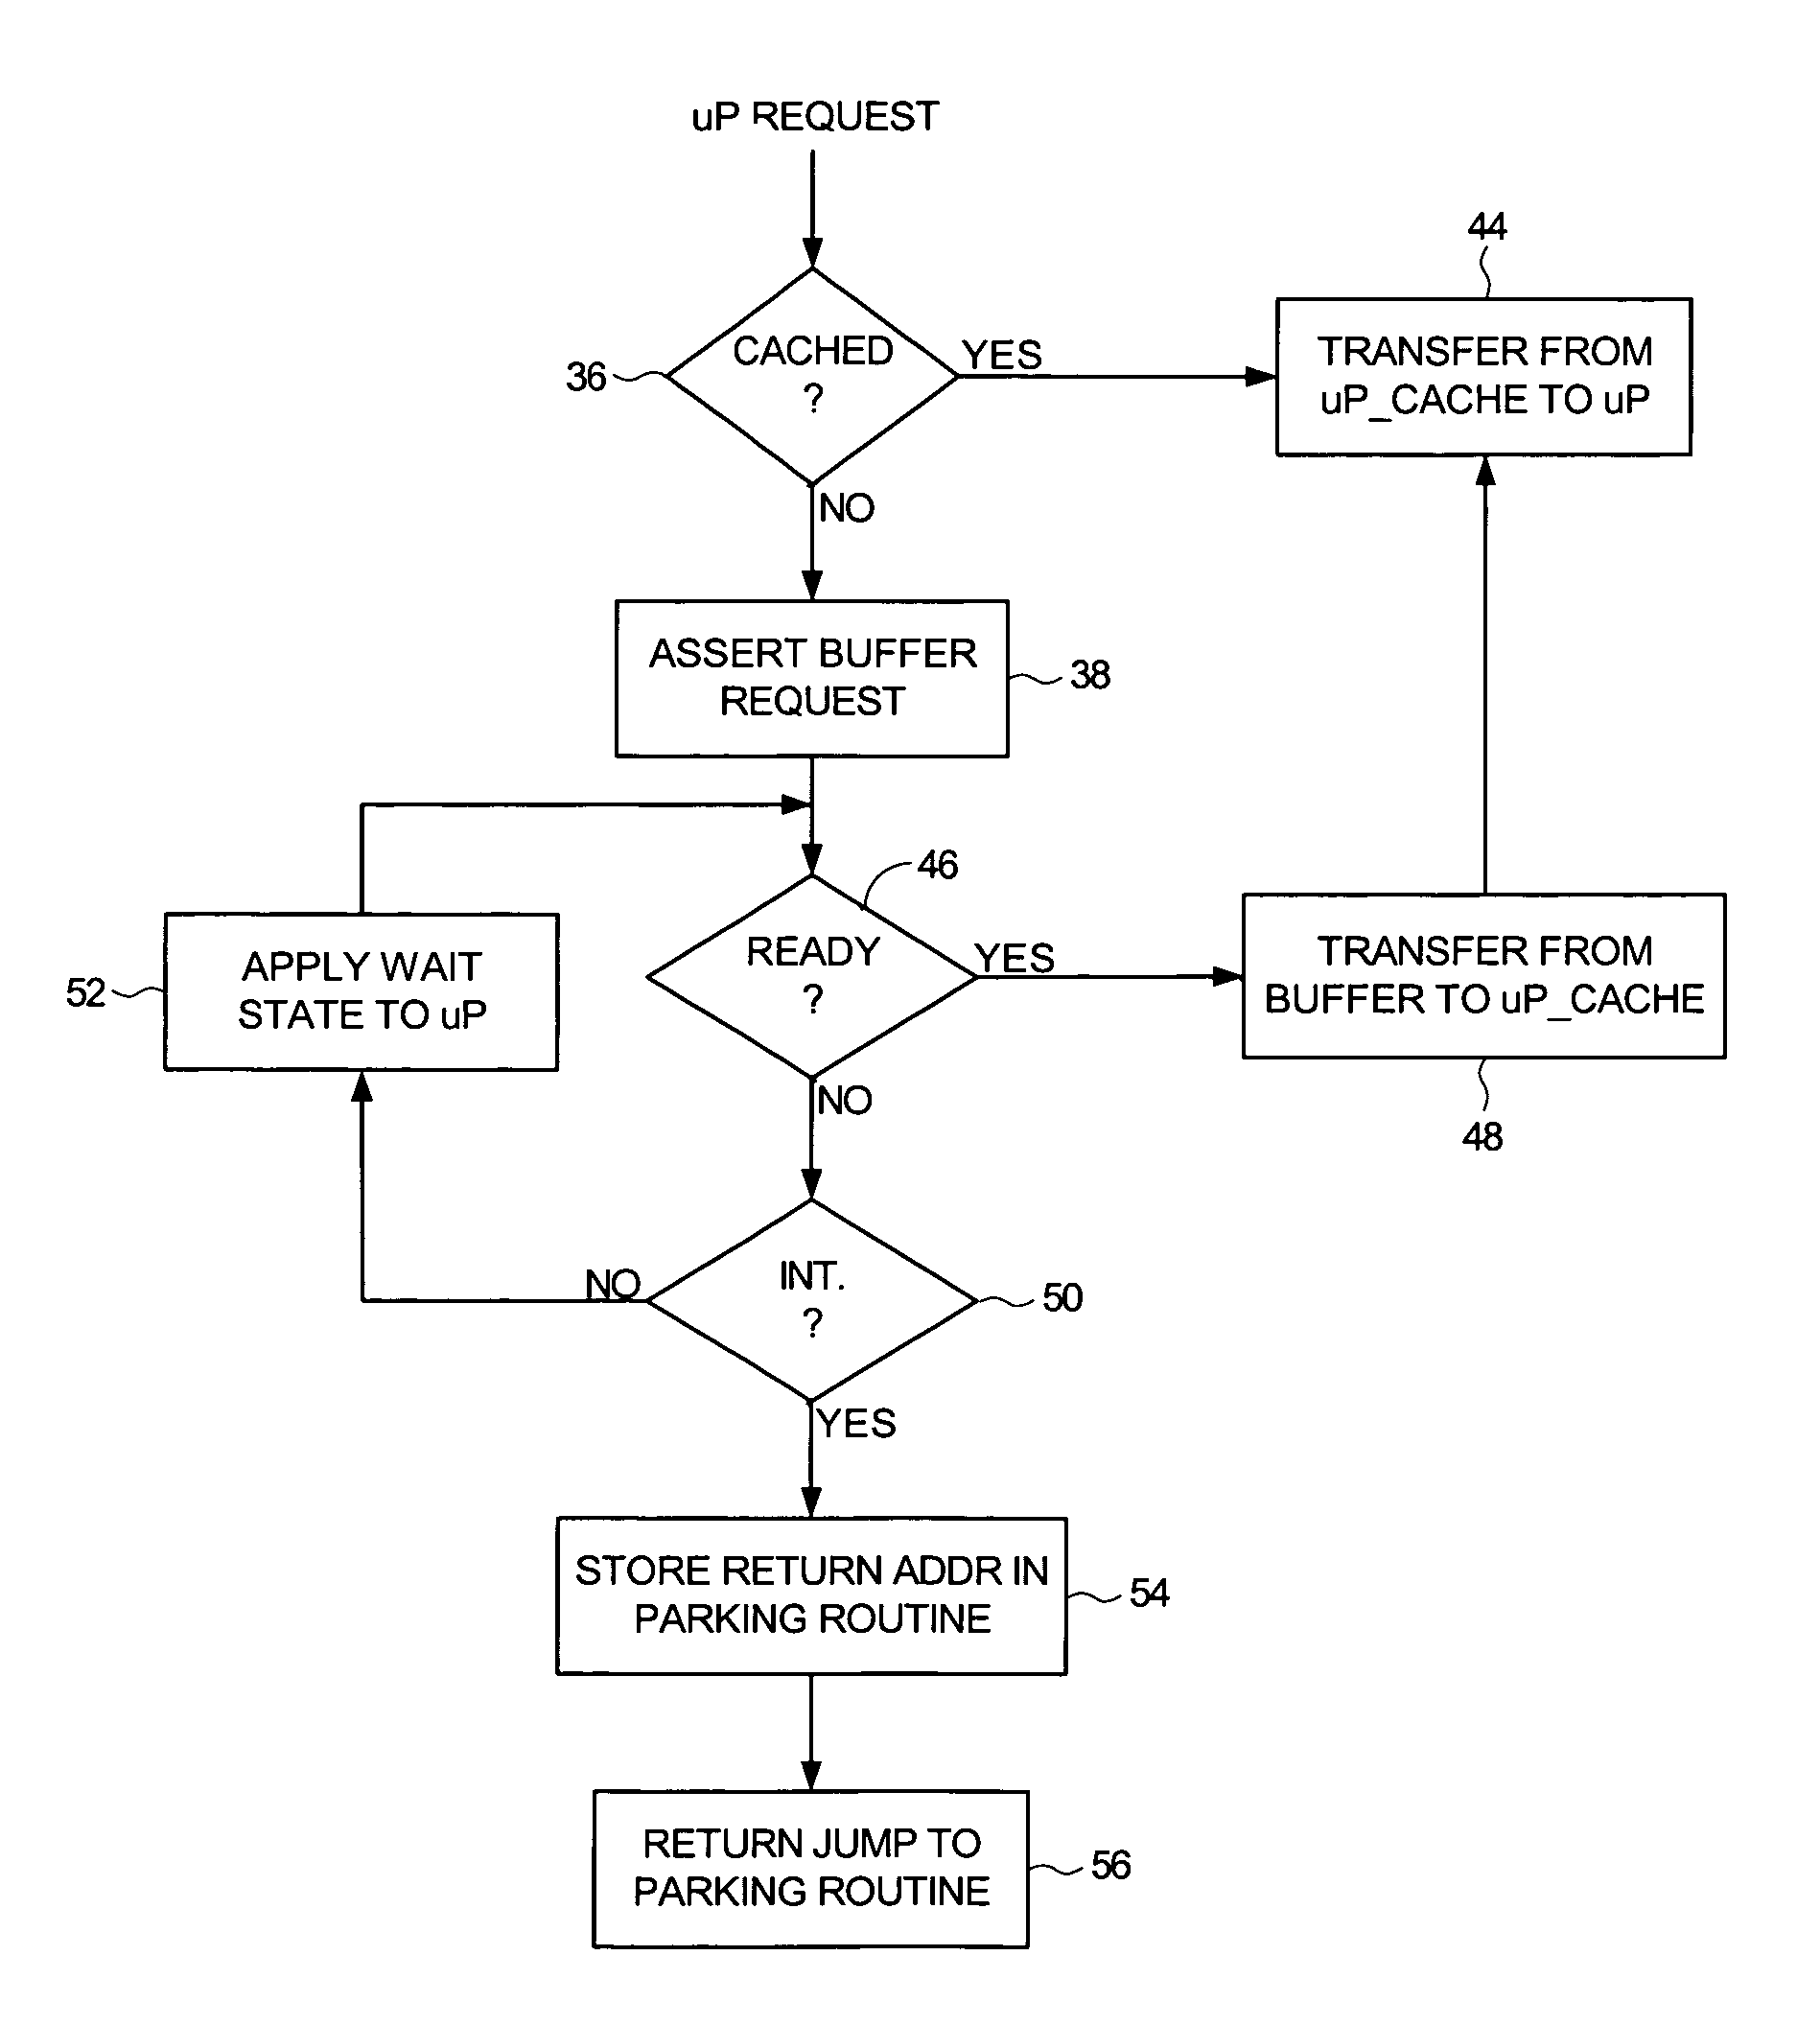 Disk drive implementing shared buffer memory with reduced interrupt latency